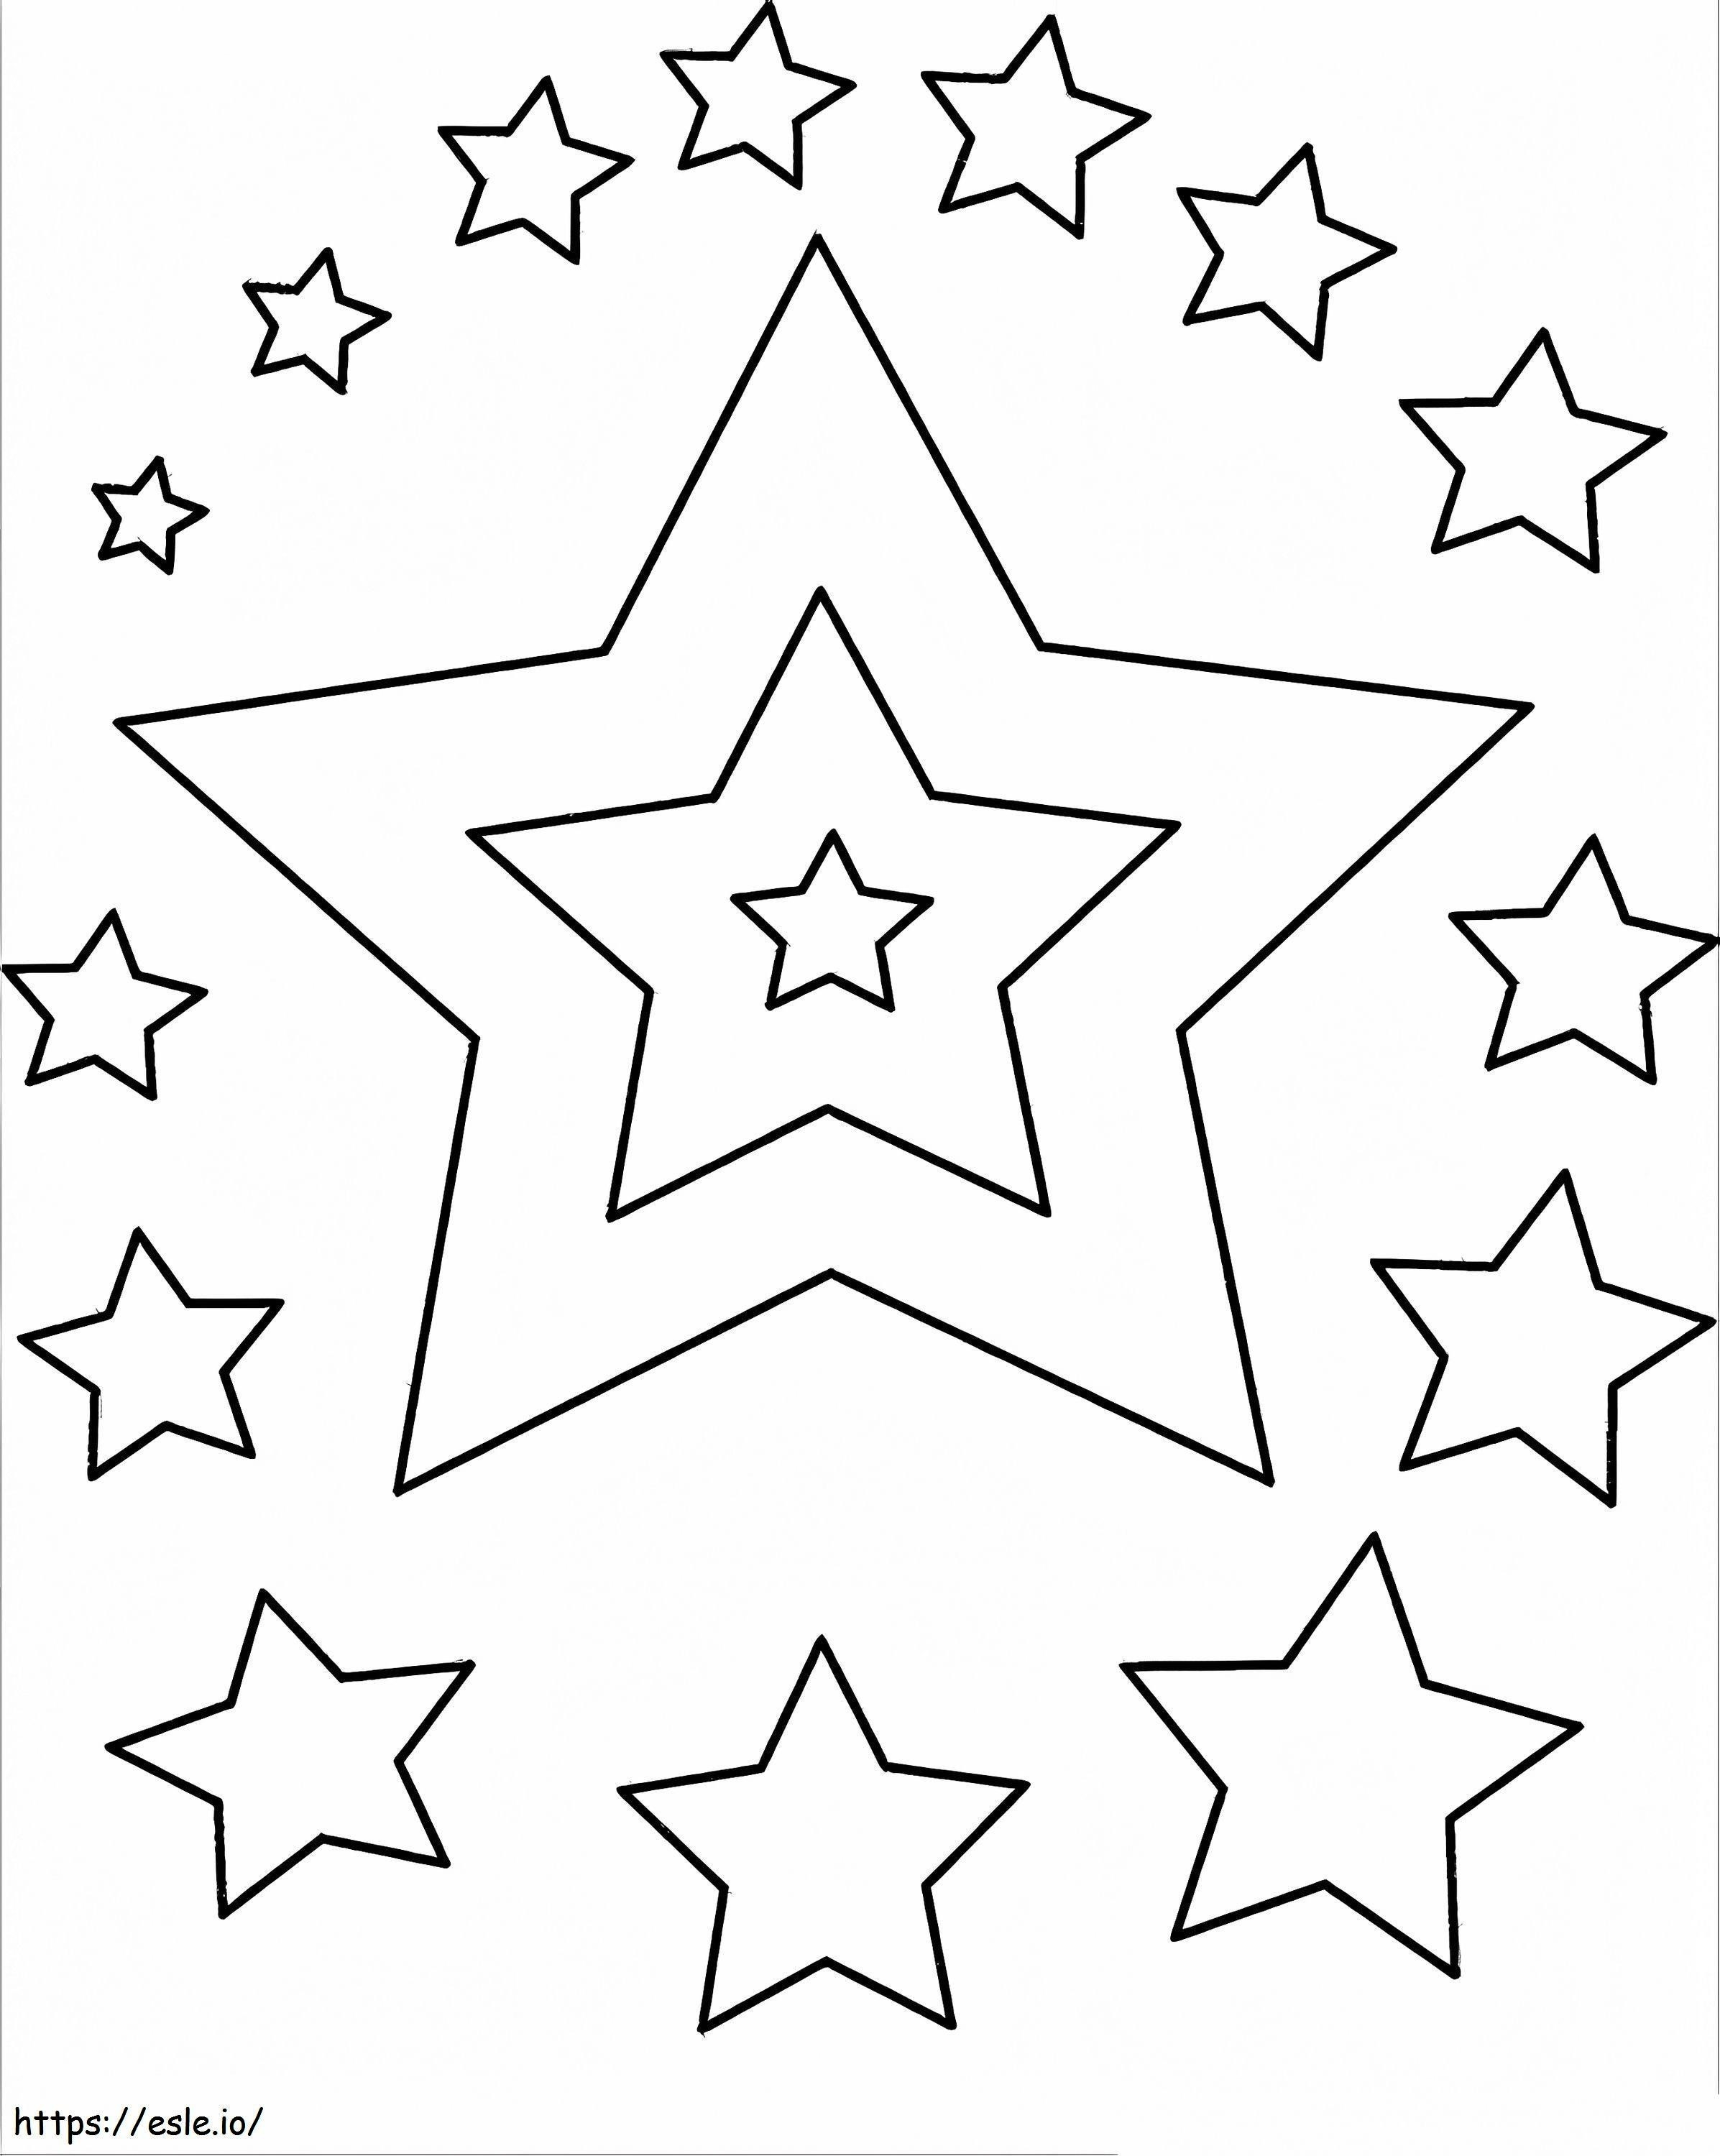 Nice Stars coloring page